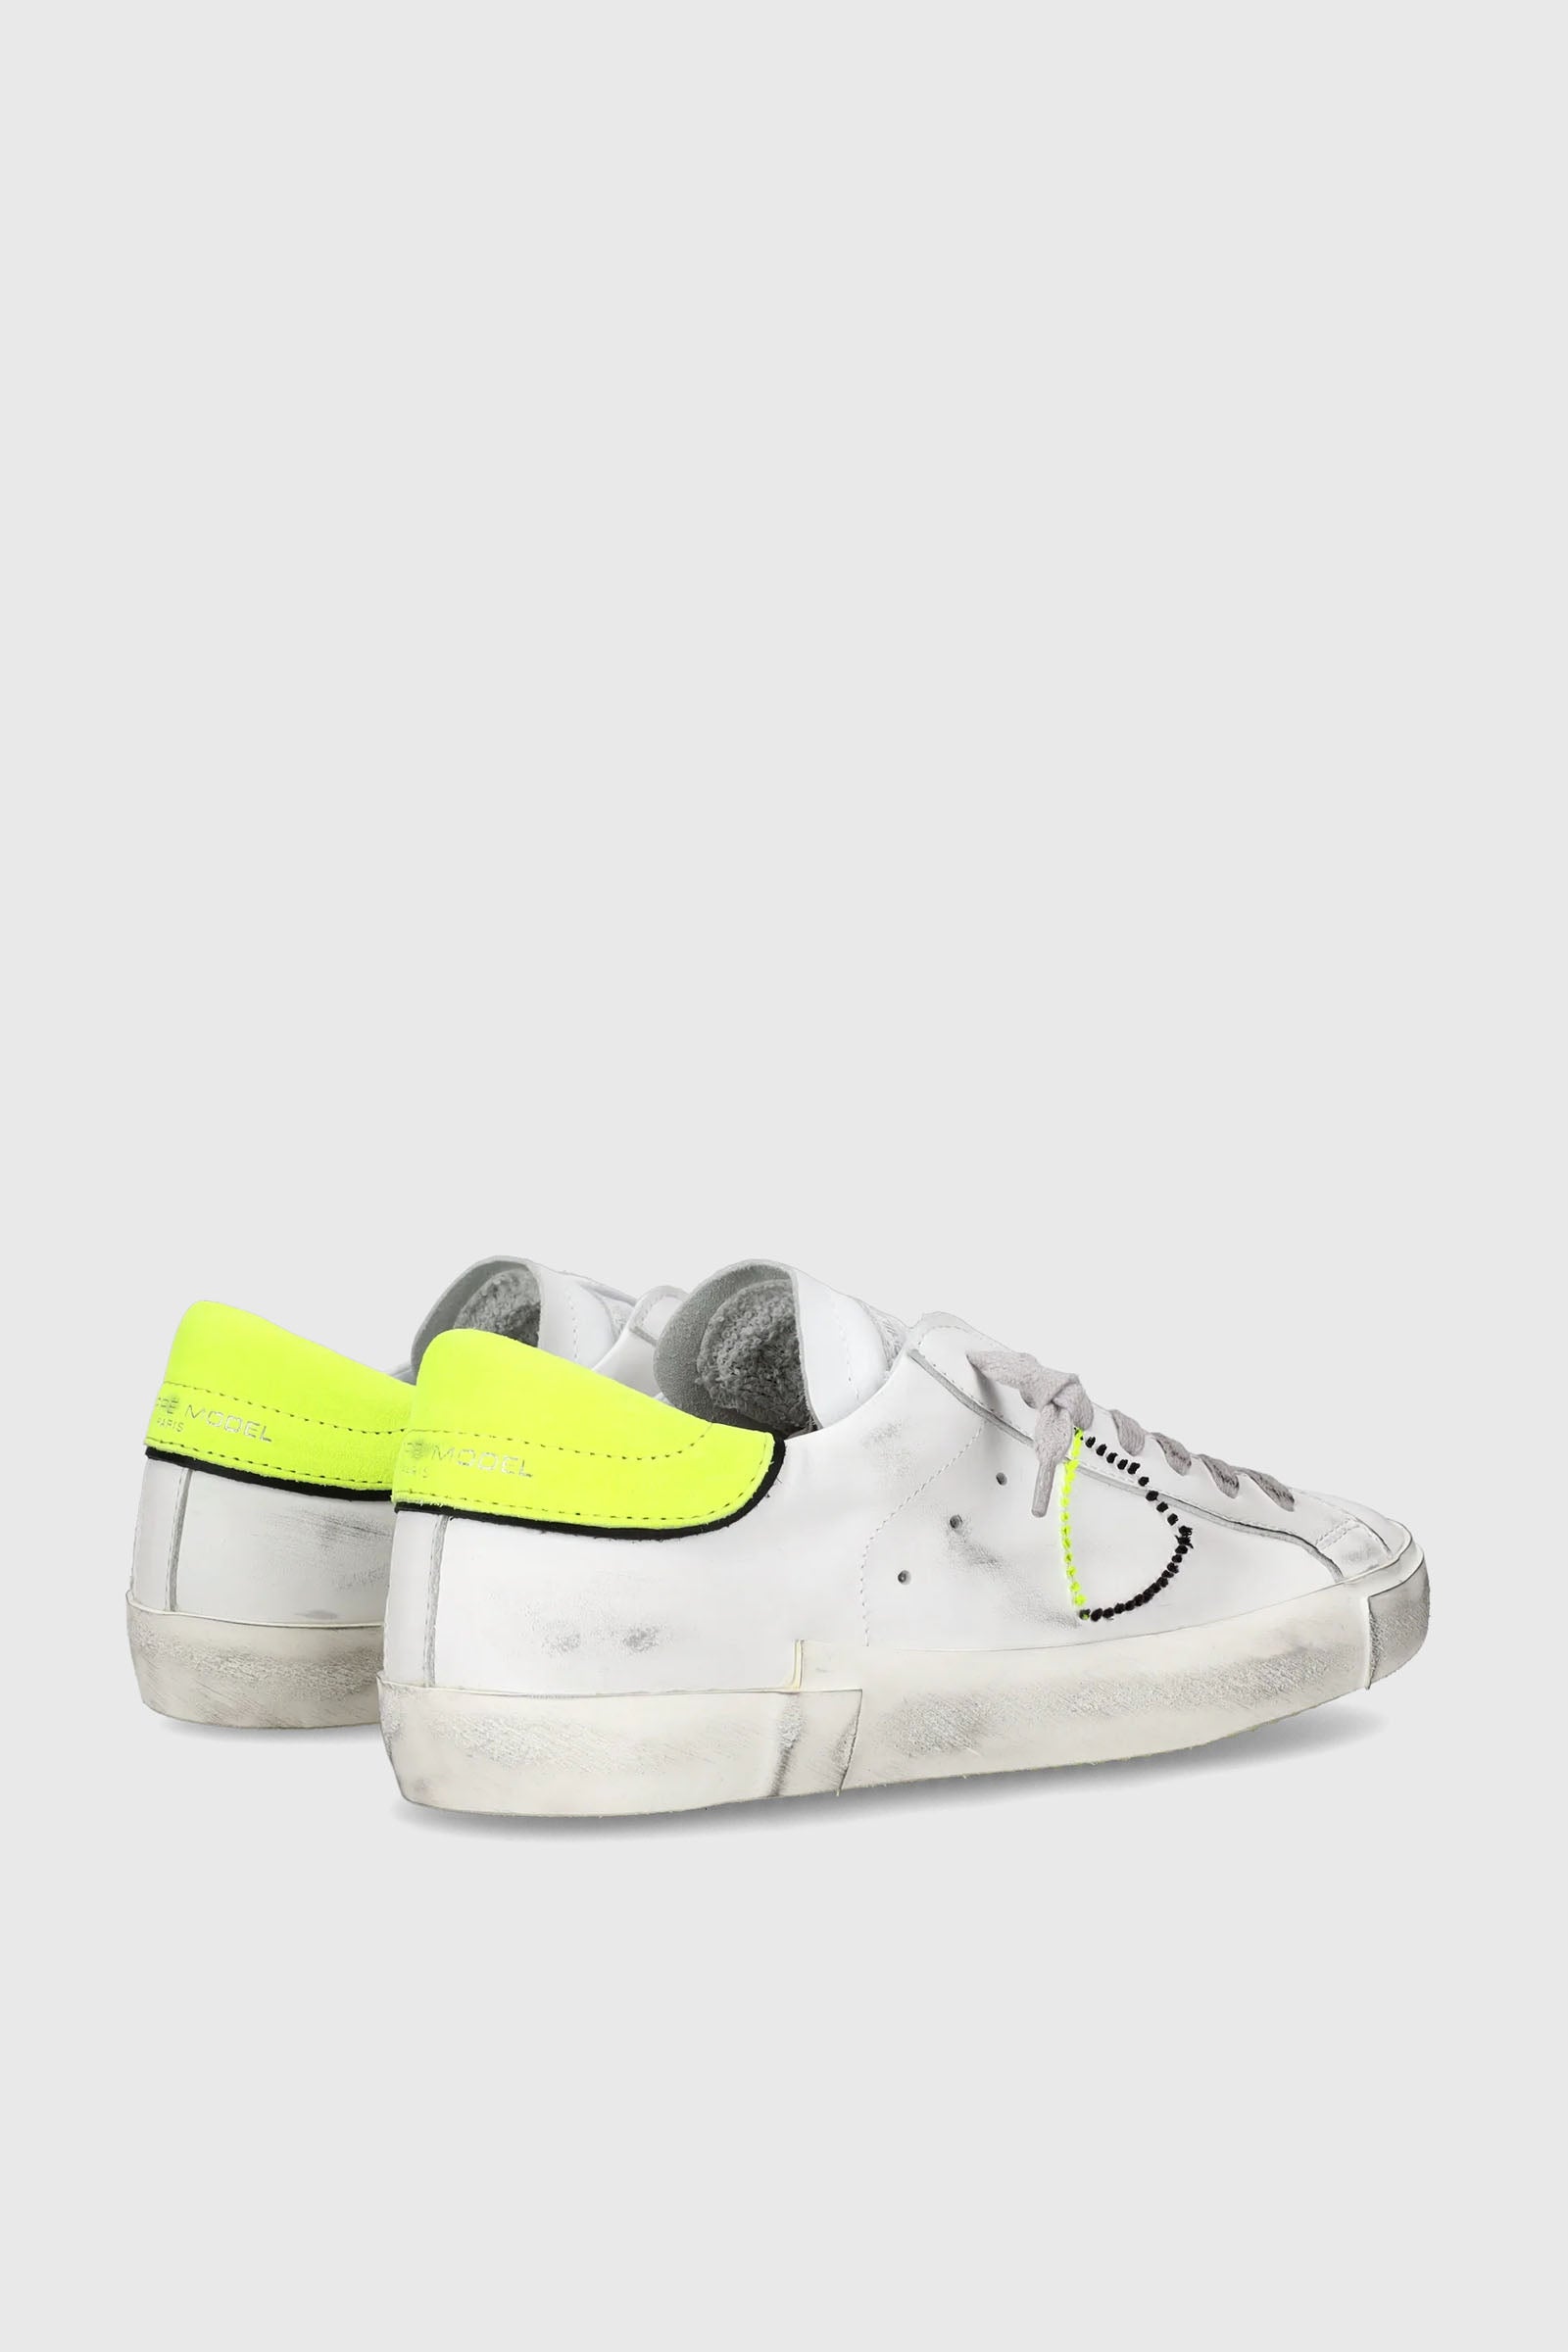 Philippe Model Sneakers PRSX Veau Broderie Leather White/Yellow Fluo - 3